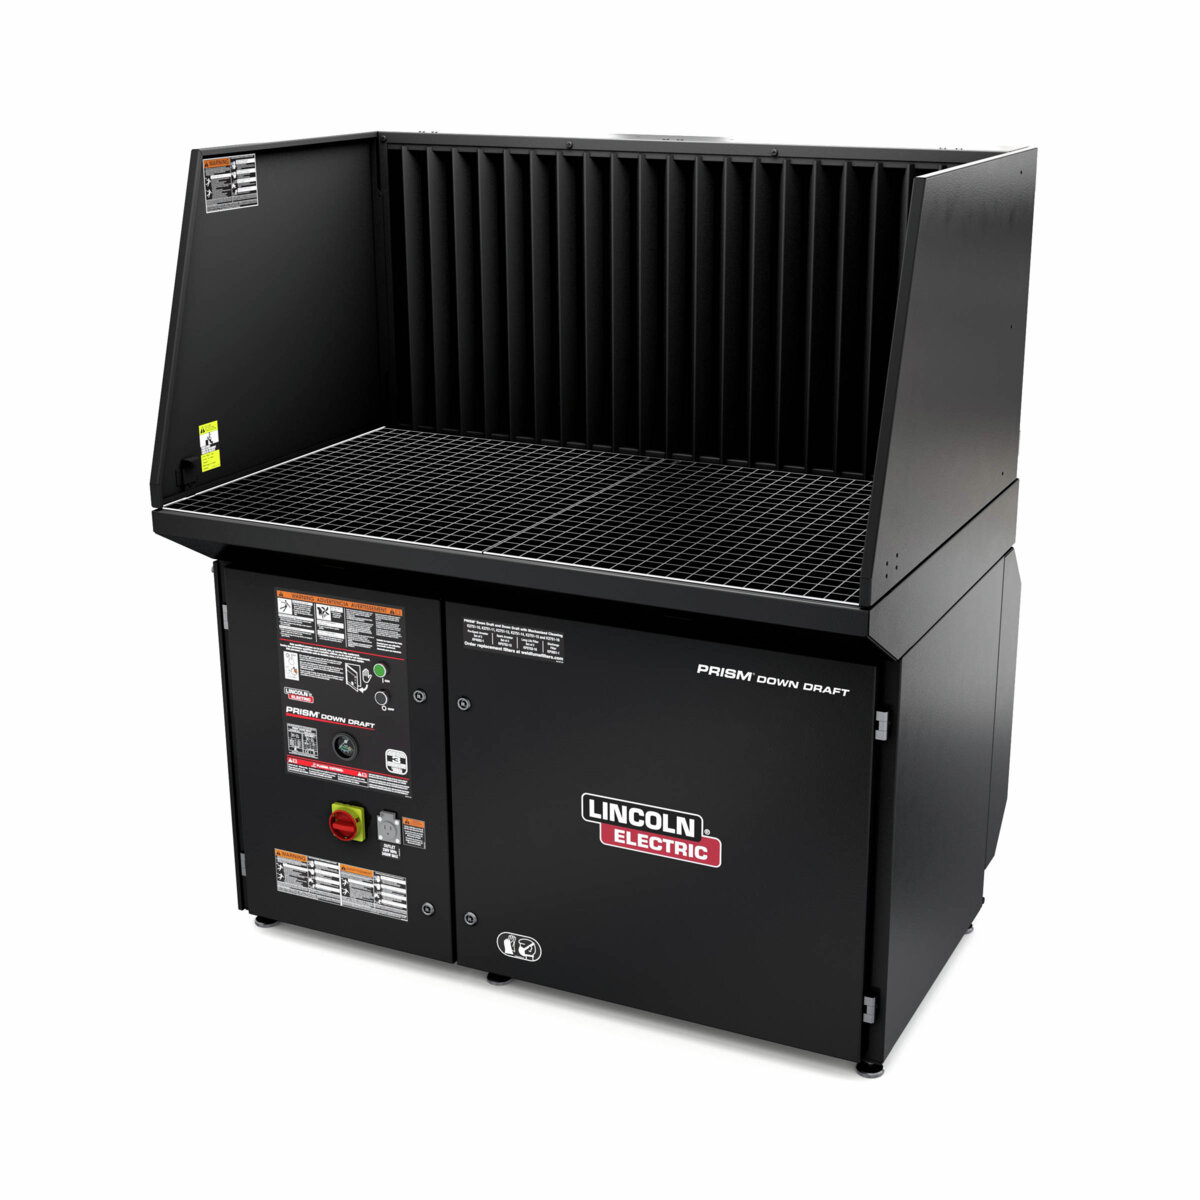 Lincoln Electric® DownFlex® 200-M K2751-10 Weld Fume Downdraft Table, 54.7 in W x 39.2 in D x 61.6 in H